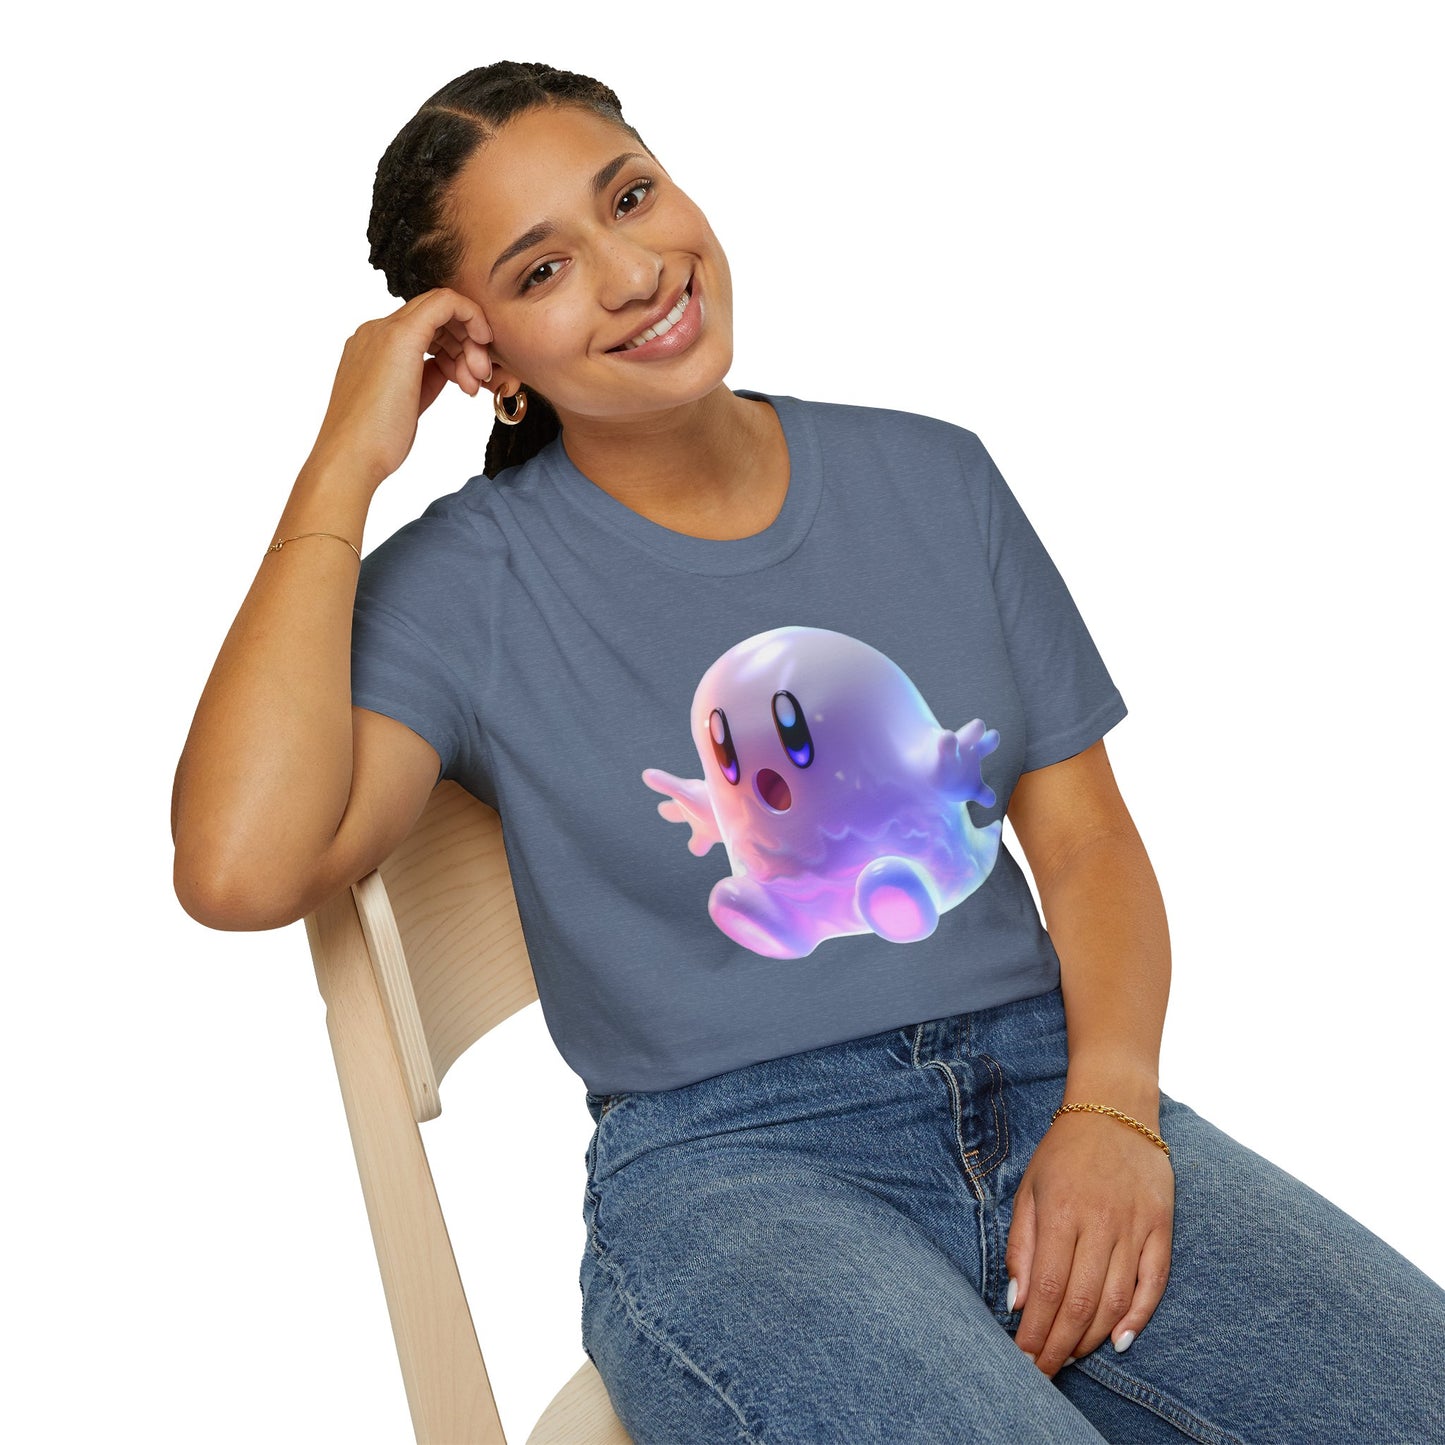 Ghostly T-Shirt